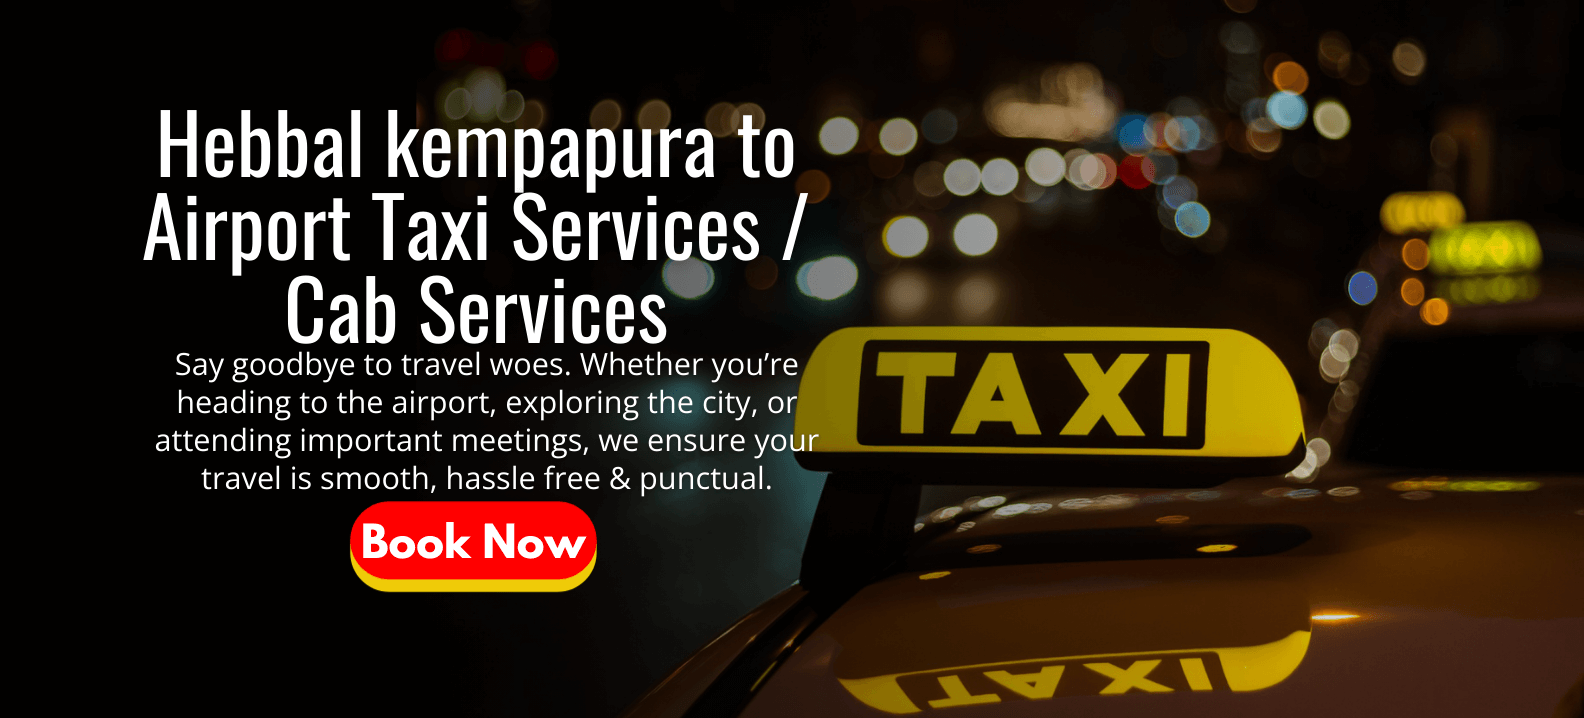 Hebbal kempapura to Airport Taxi Services _ Cab Services